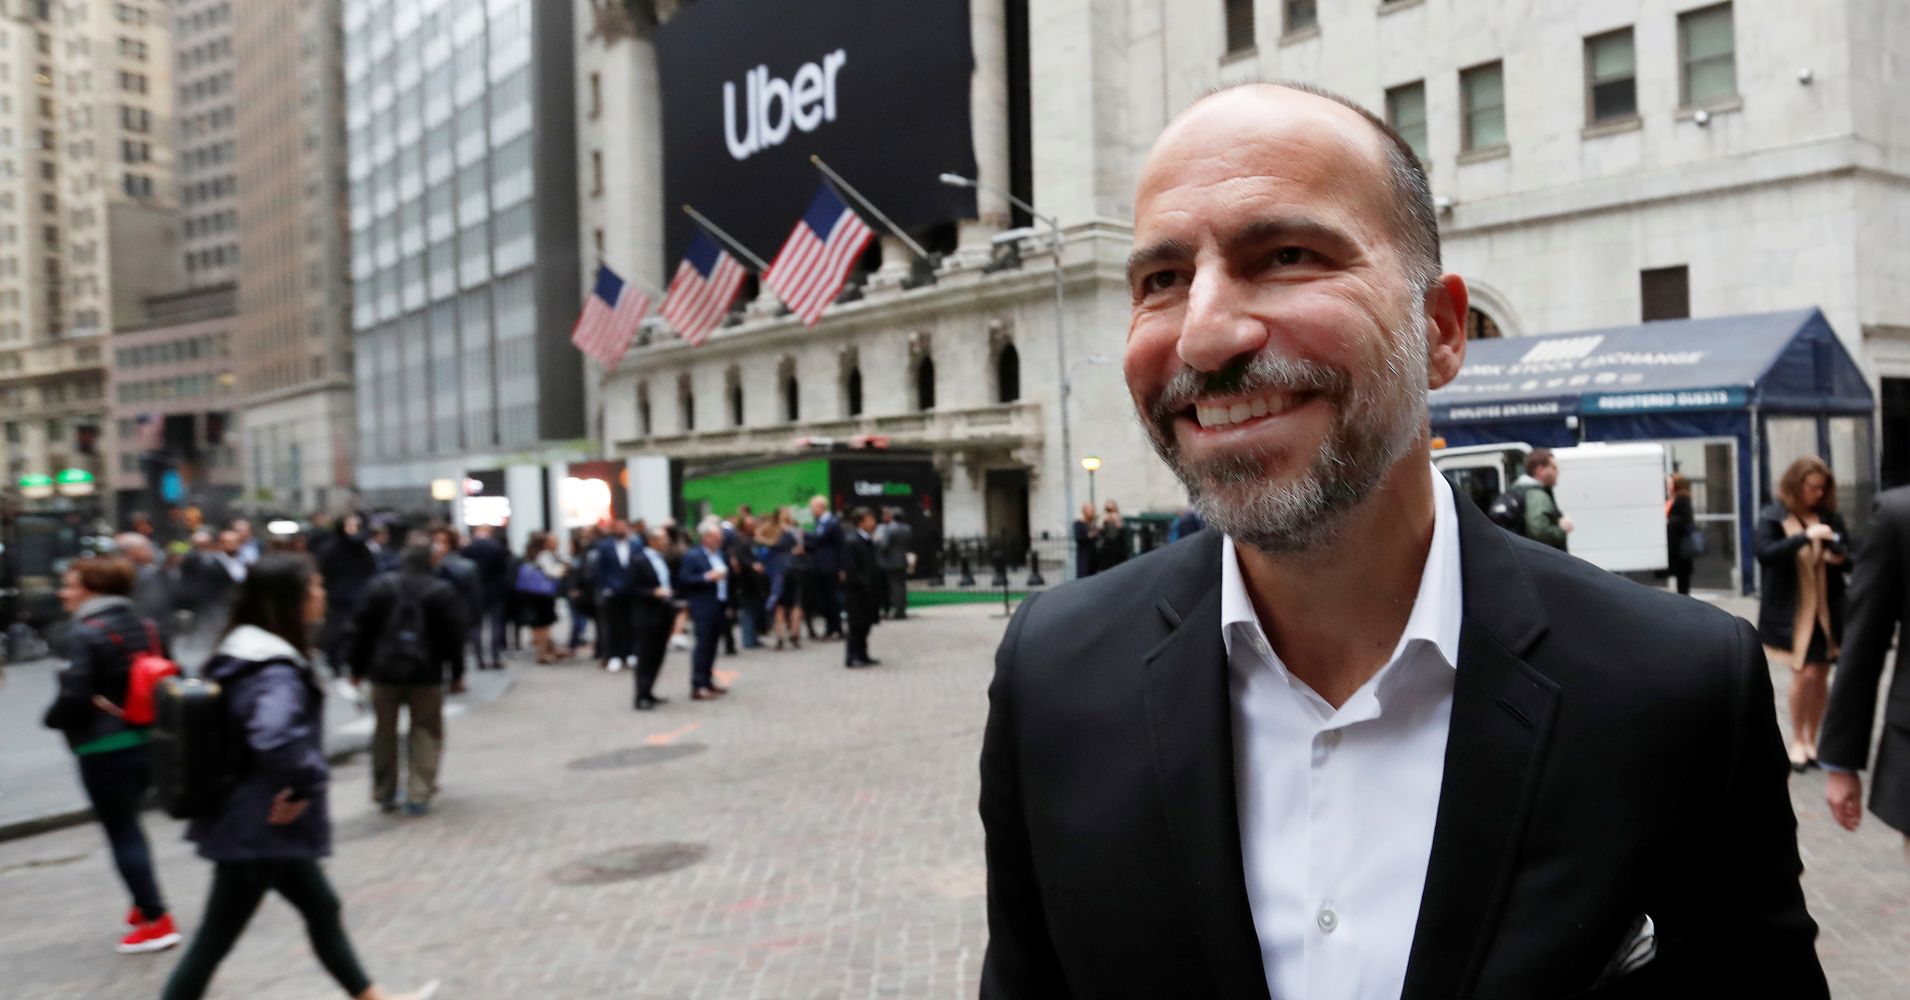 Uber CEO says he's building the next Amazon, though growth is slowing